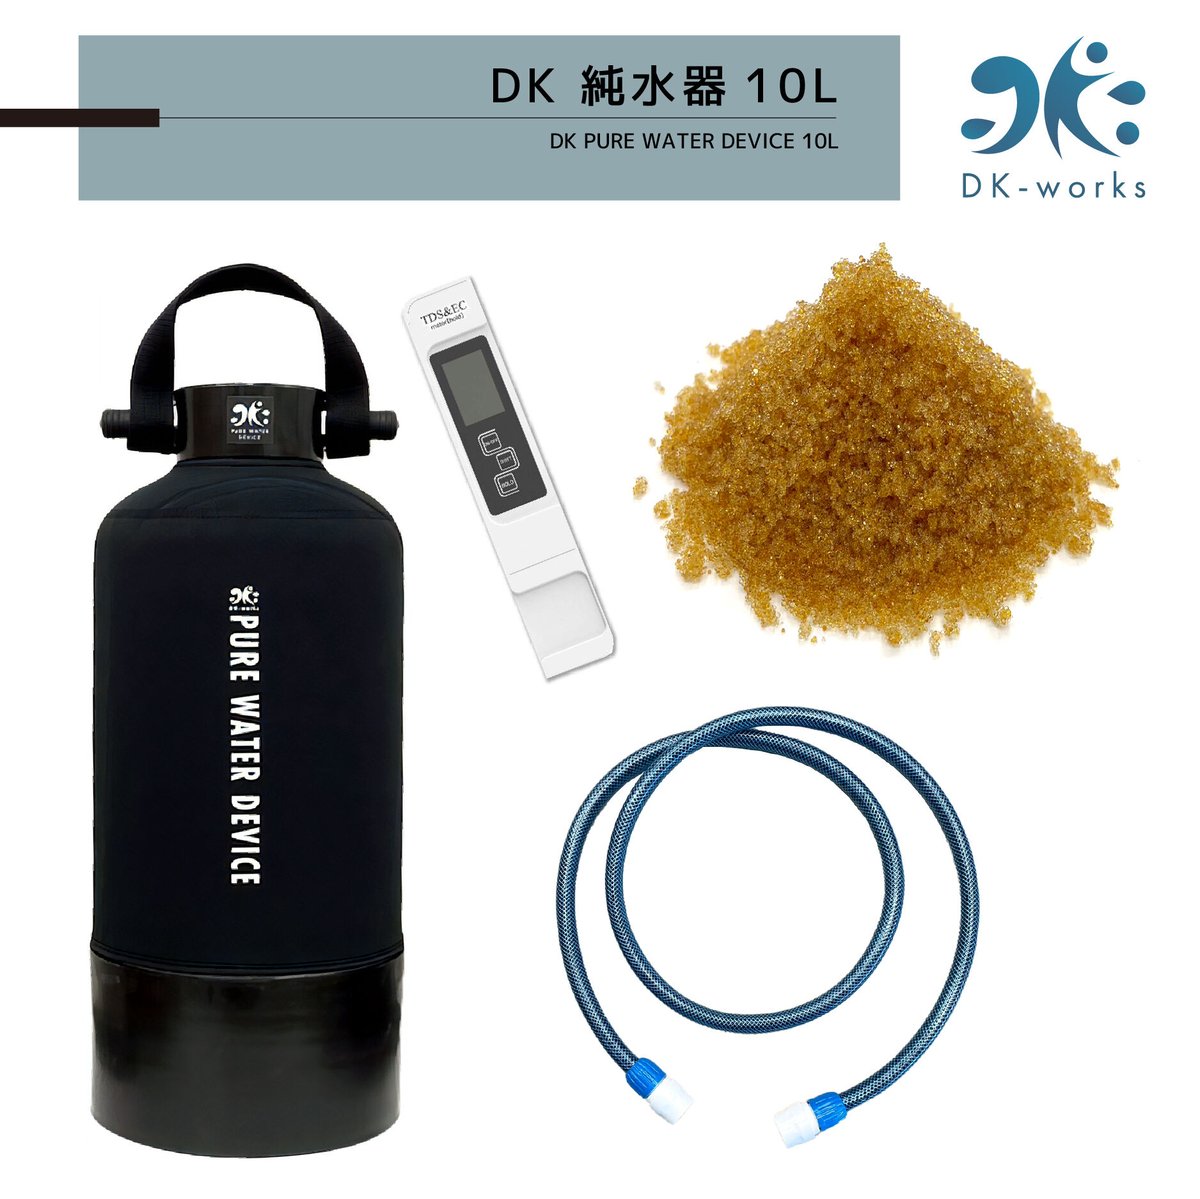 DK PURE WATER DEVICE 10L（洗車用純水器） | DK-works STORE